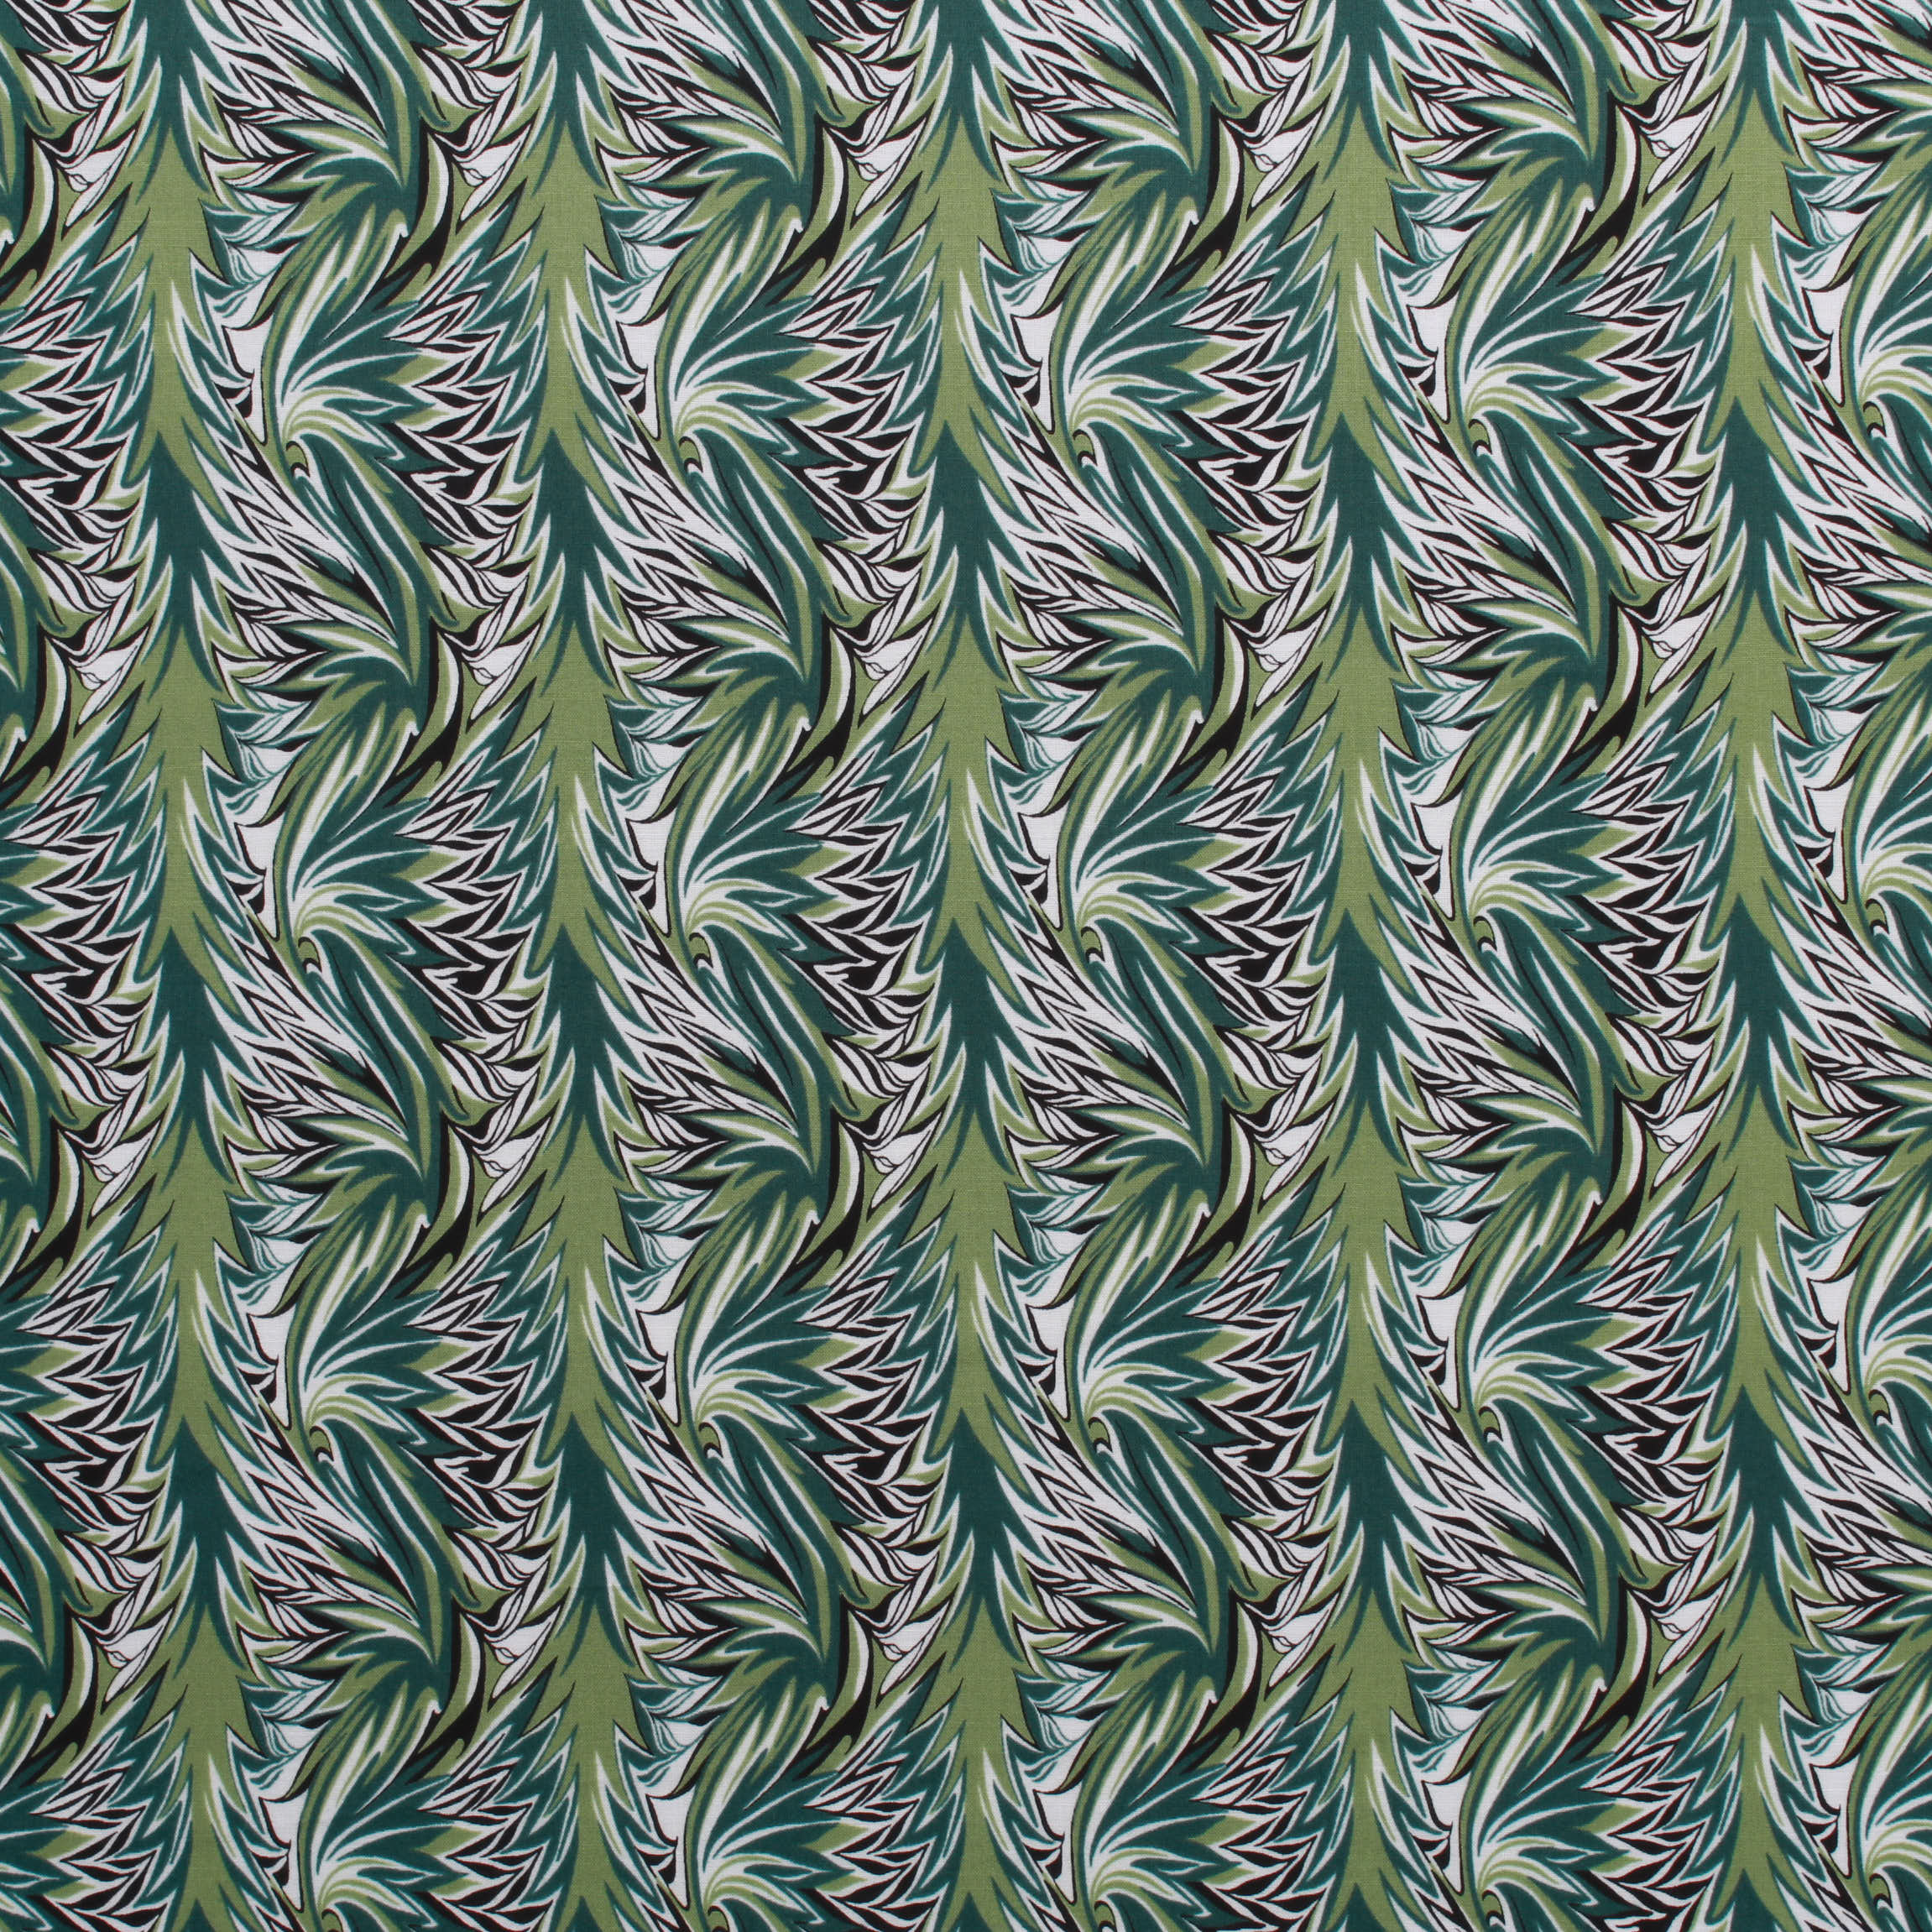 100% Cotton Lawn, 'Green Tropical Leaves', 60" Wide